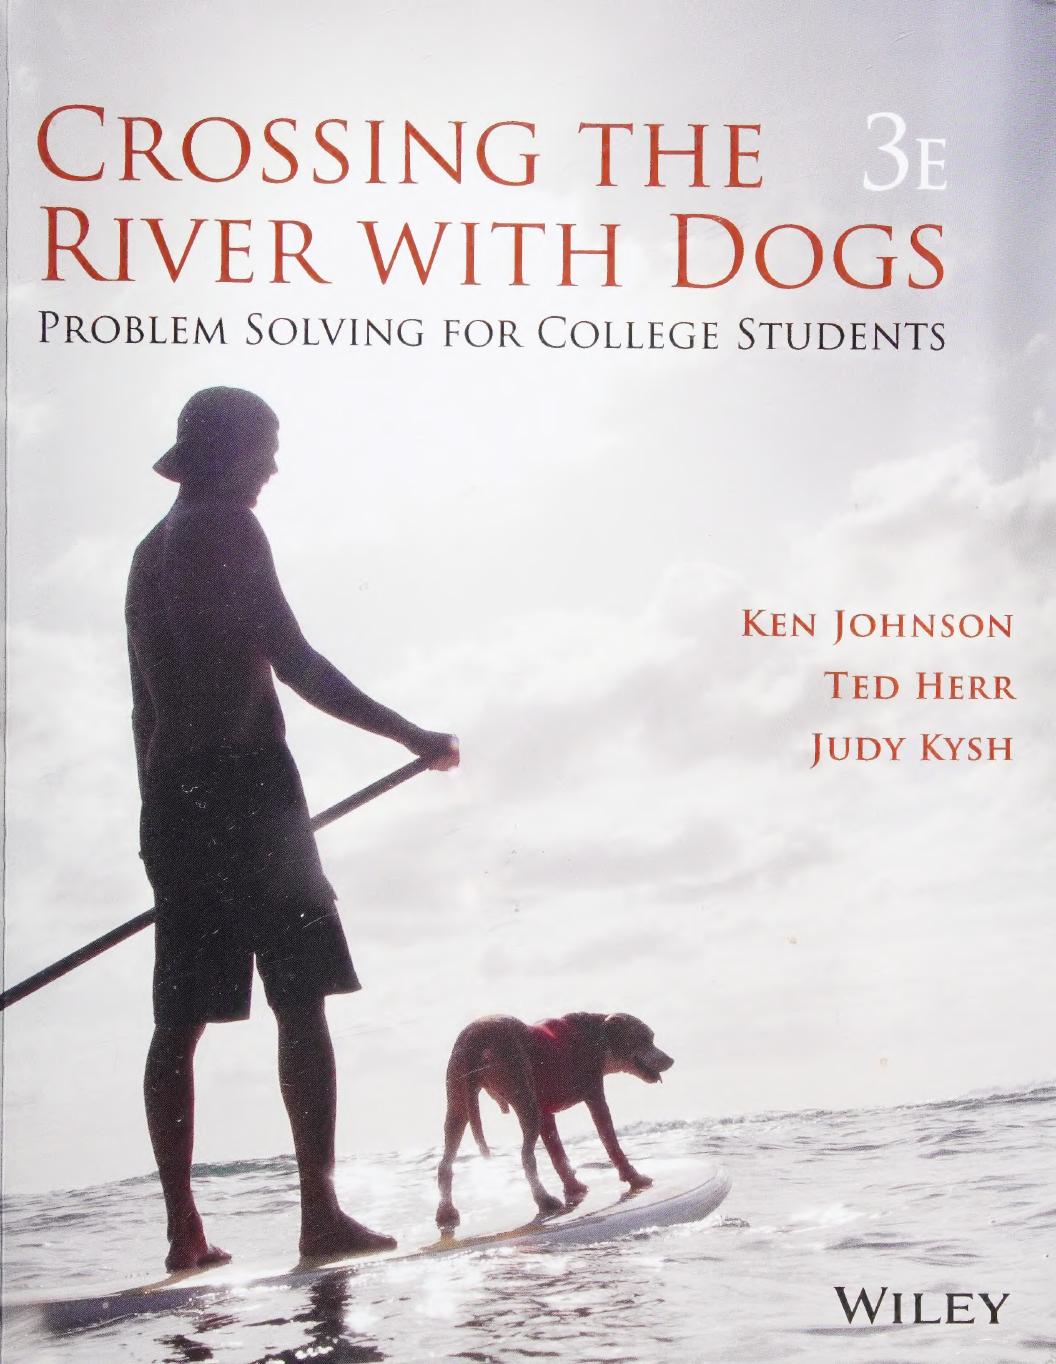 Crossing the River with Dogs: Problem Solving for College Students by Ken Johnson Ted Herr Judy Kysh